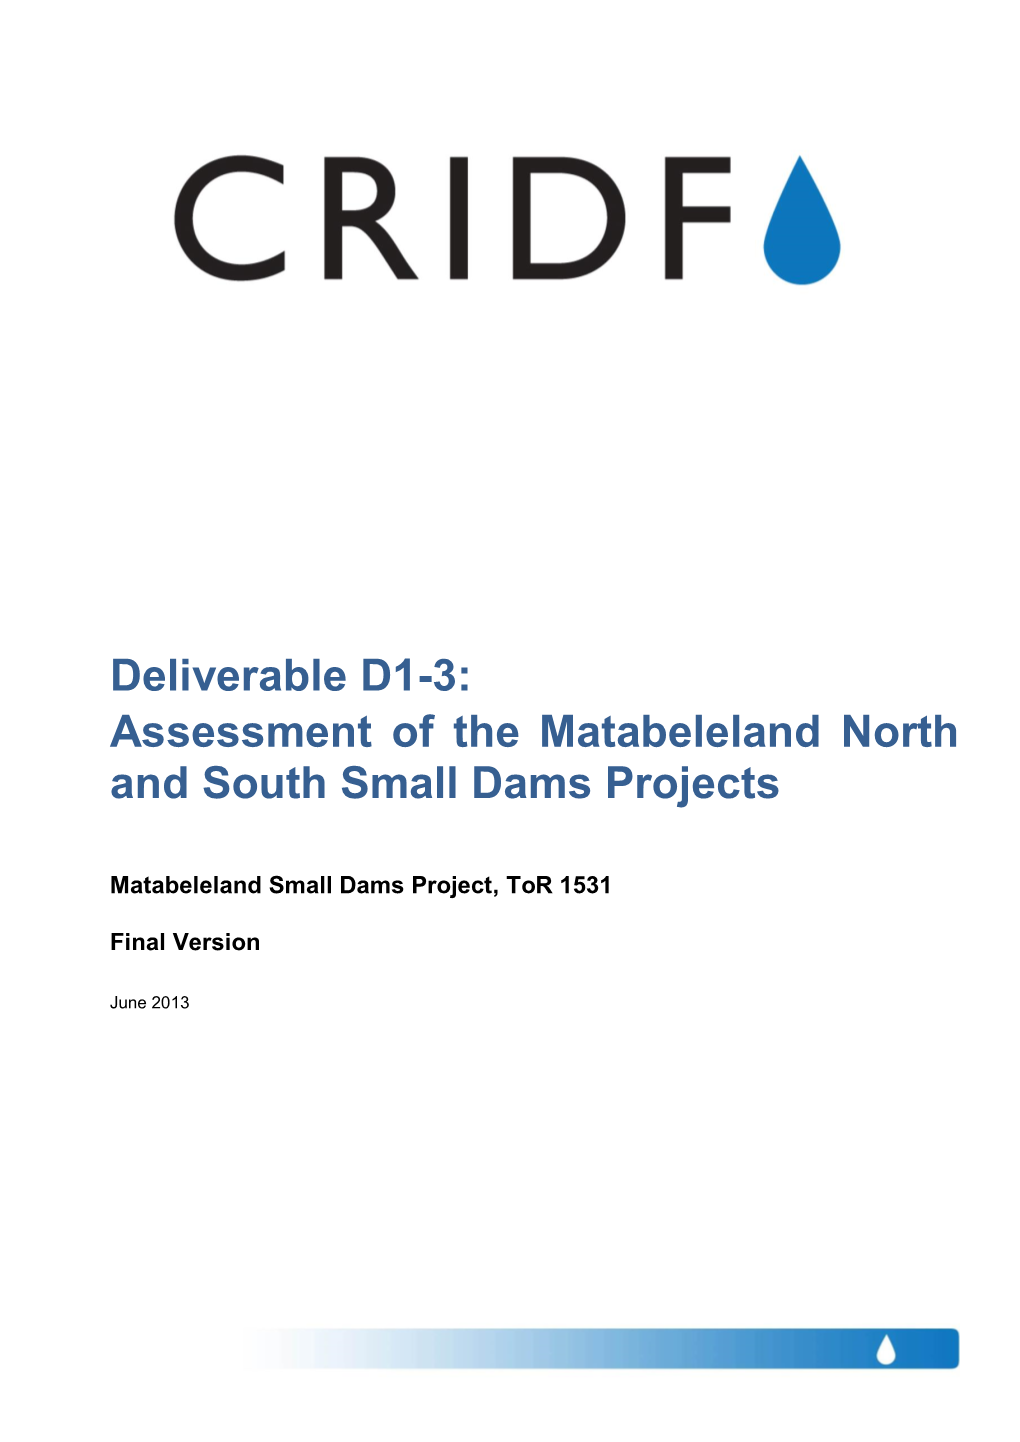 Deliverable D1-3: Assessment of the Matabeleland North and South Small Dams Projects